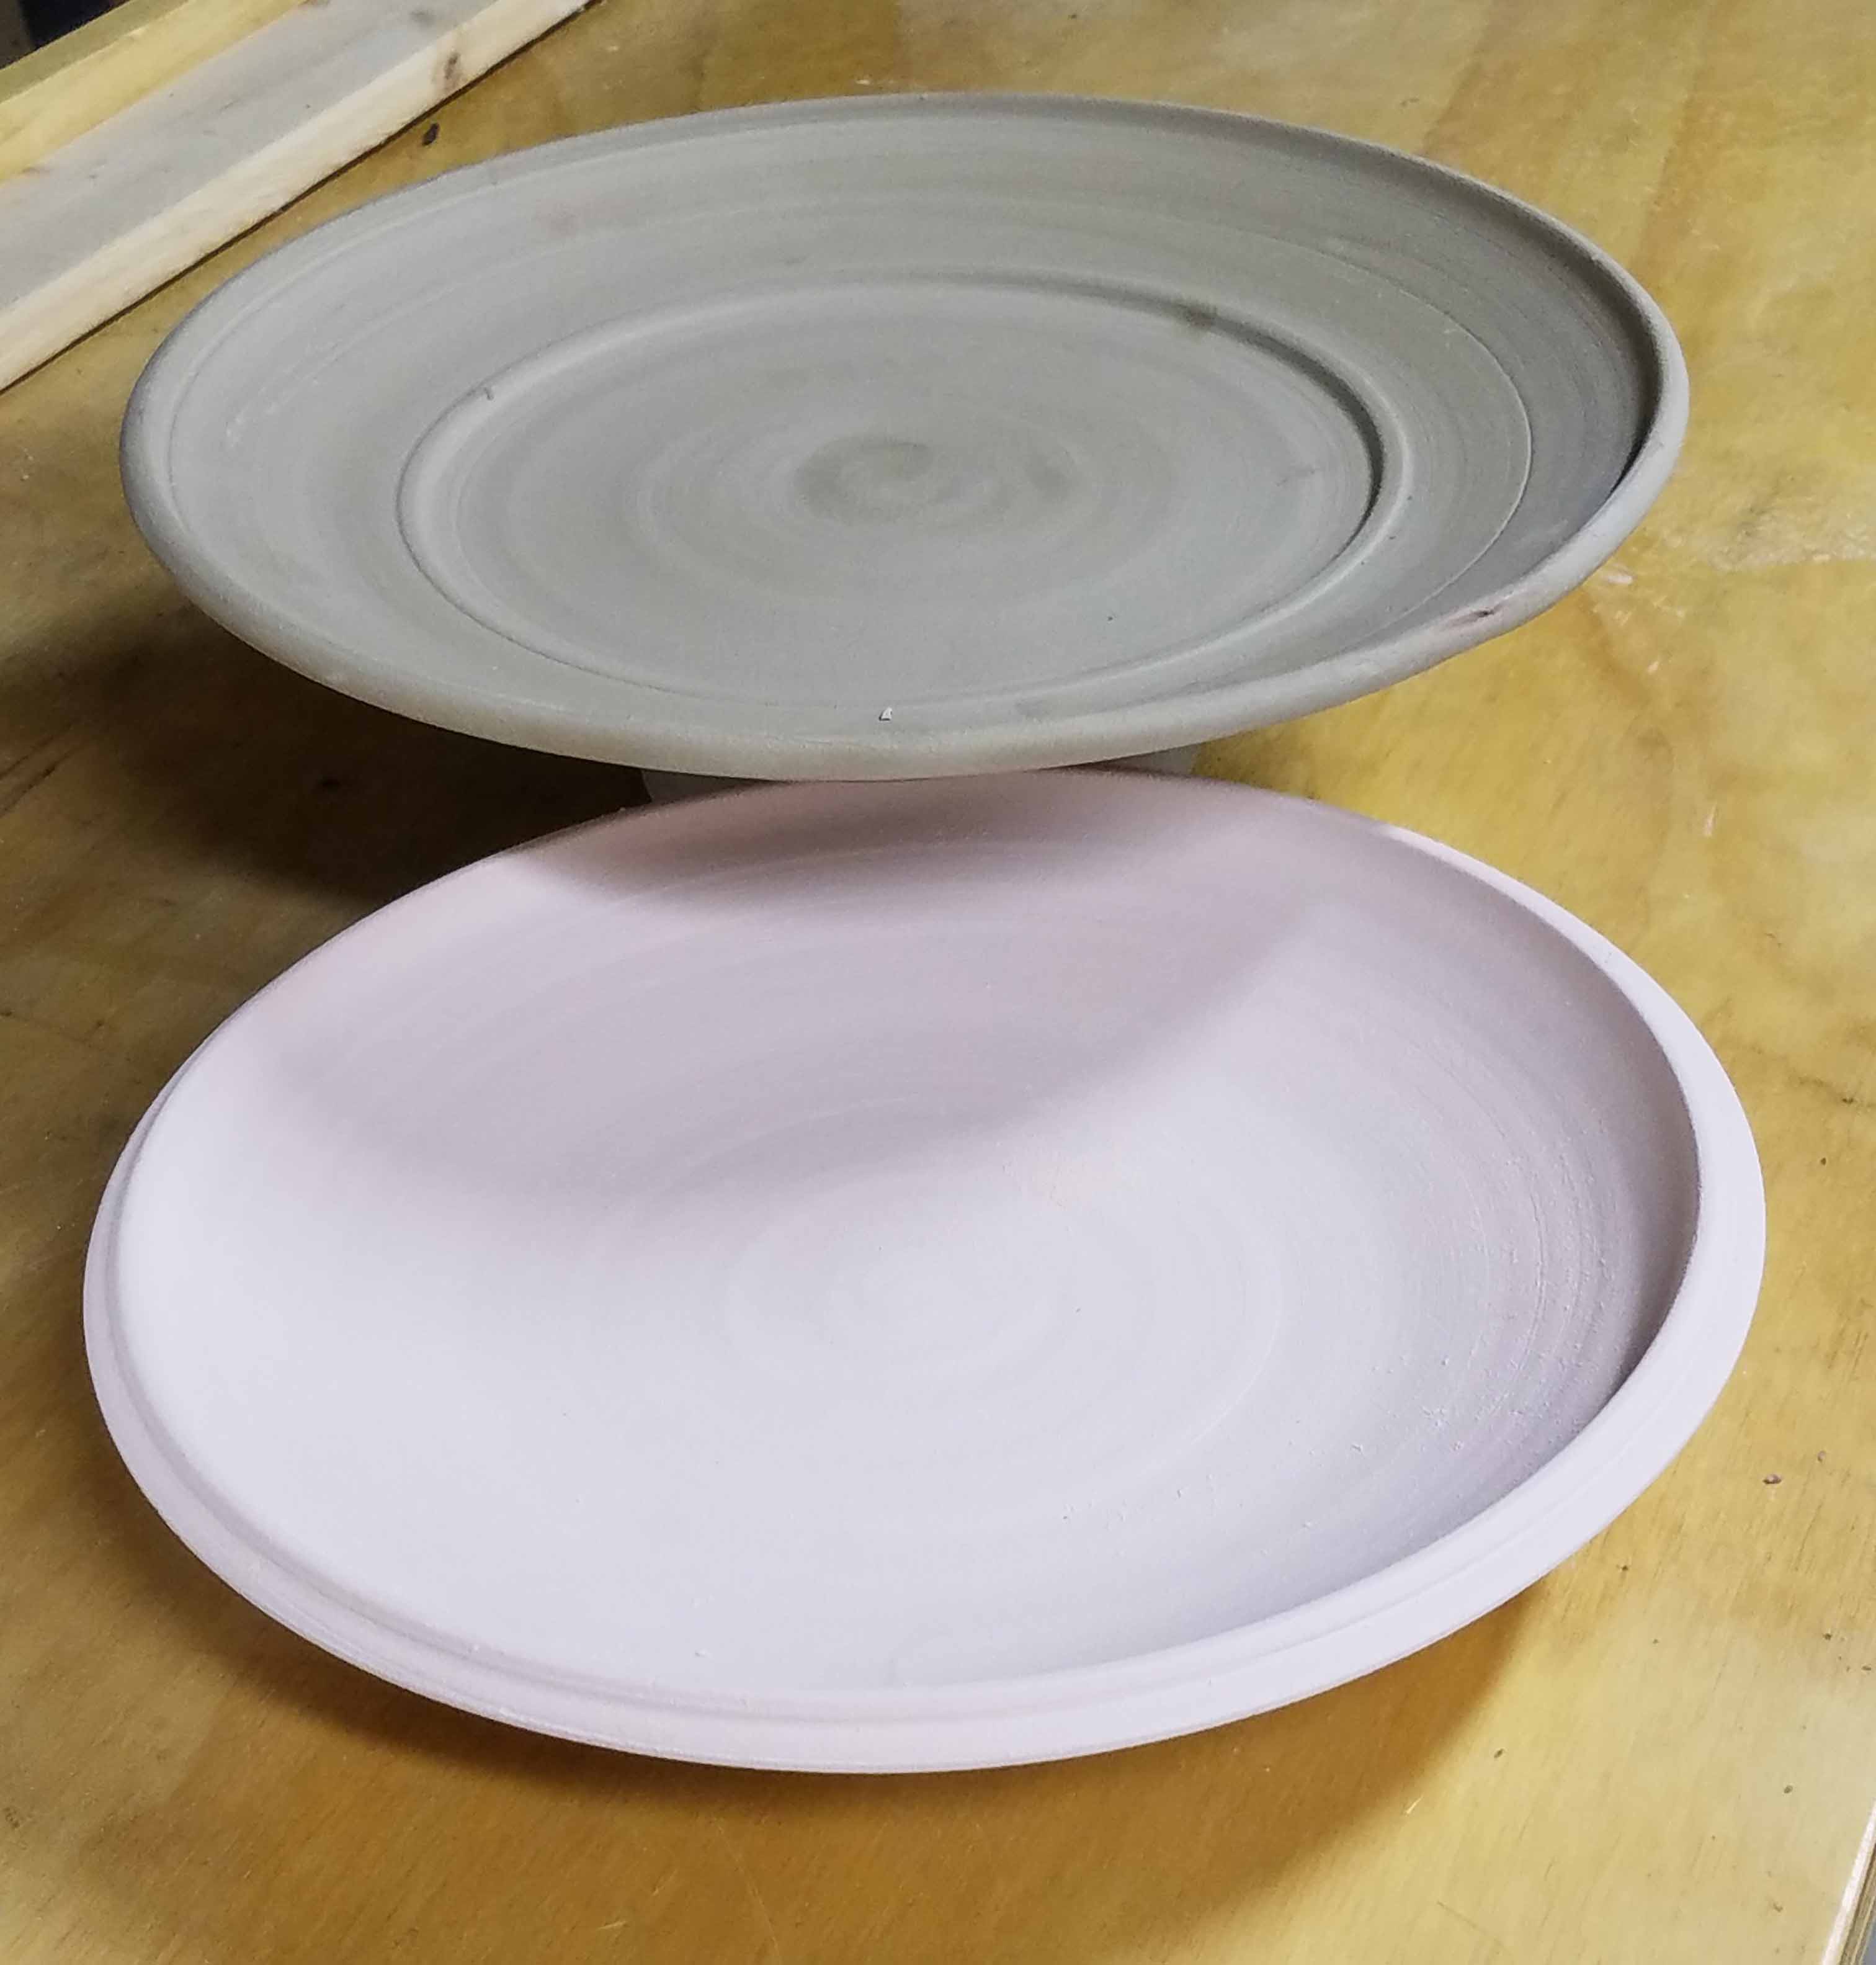 https://newclaypottery.com/wp-content/uploads/2019/07/Euro-Asian-Low-Angle-1.jpg